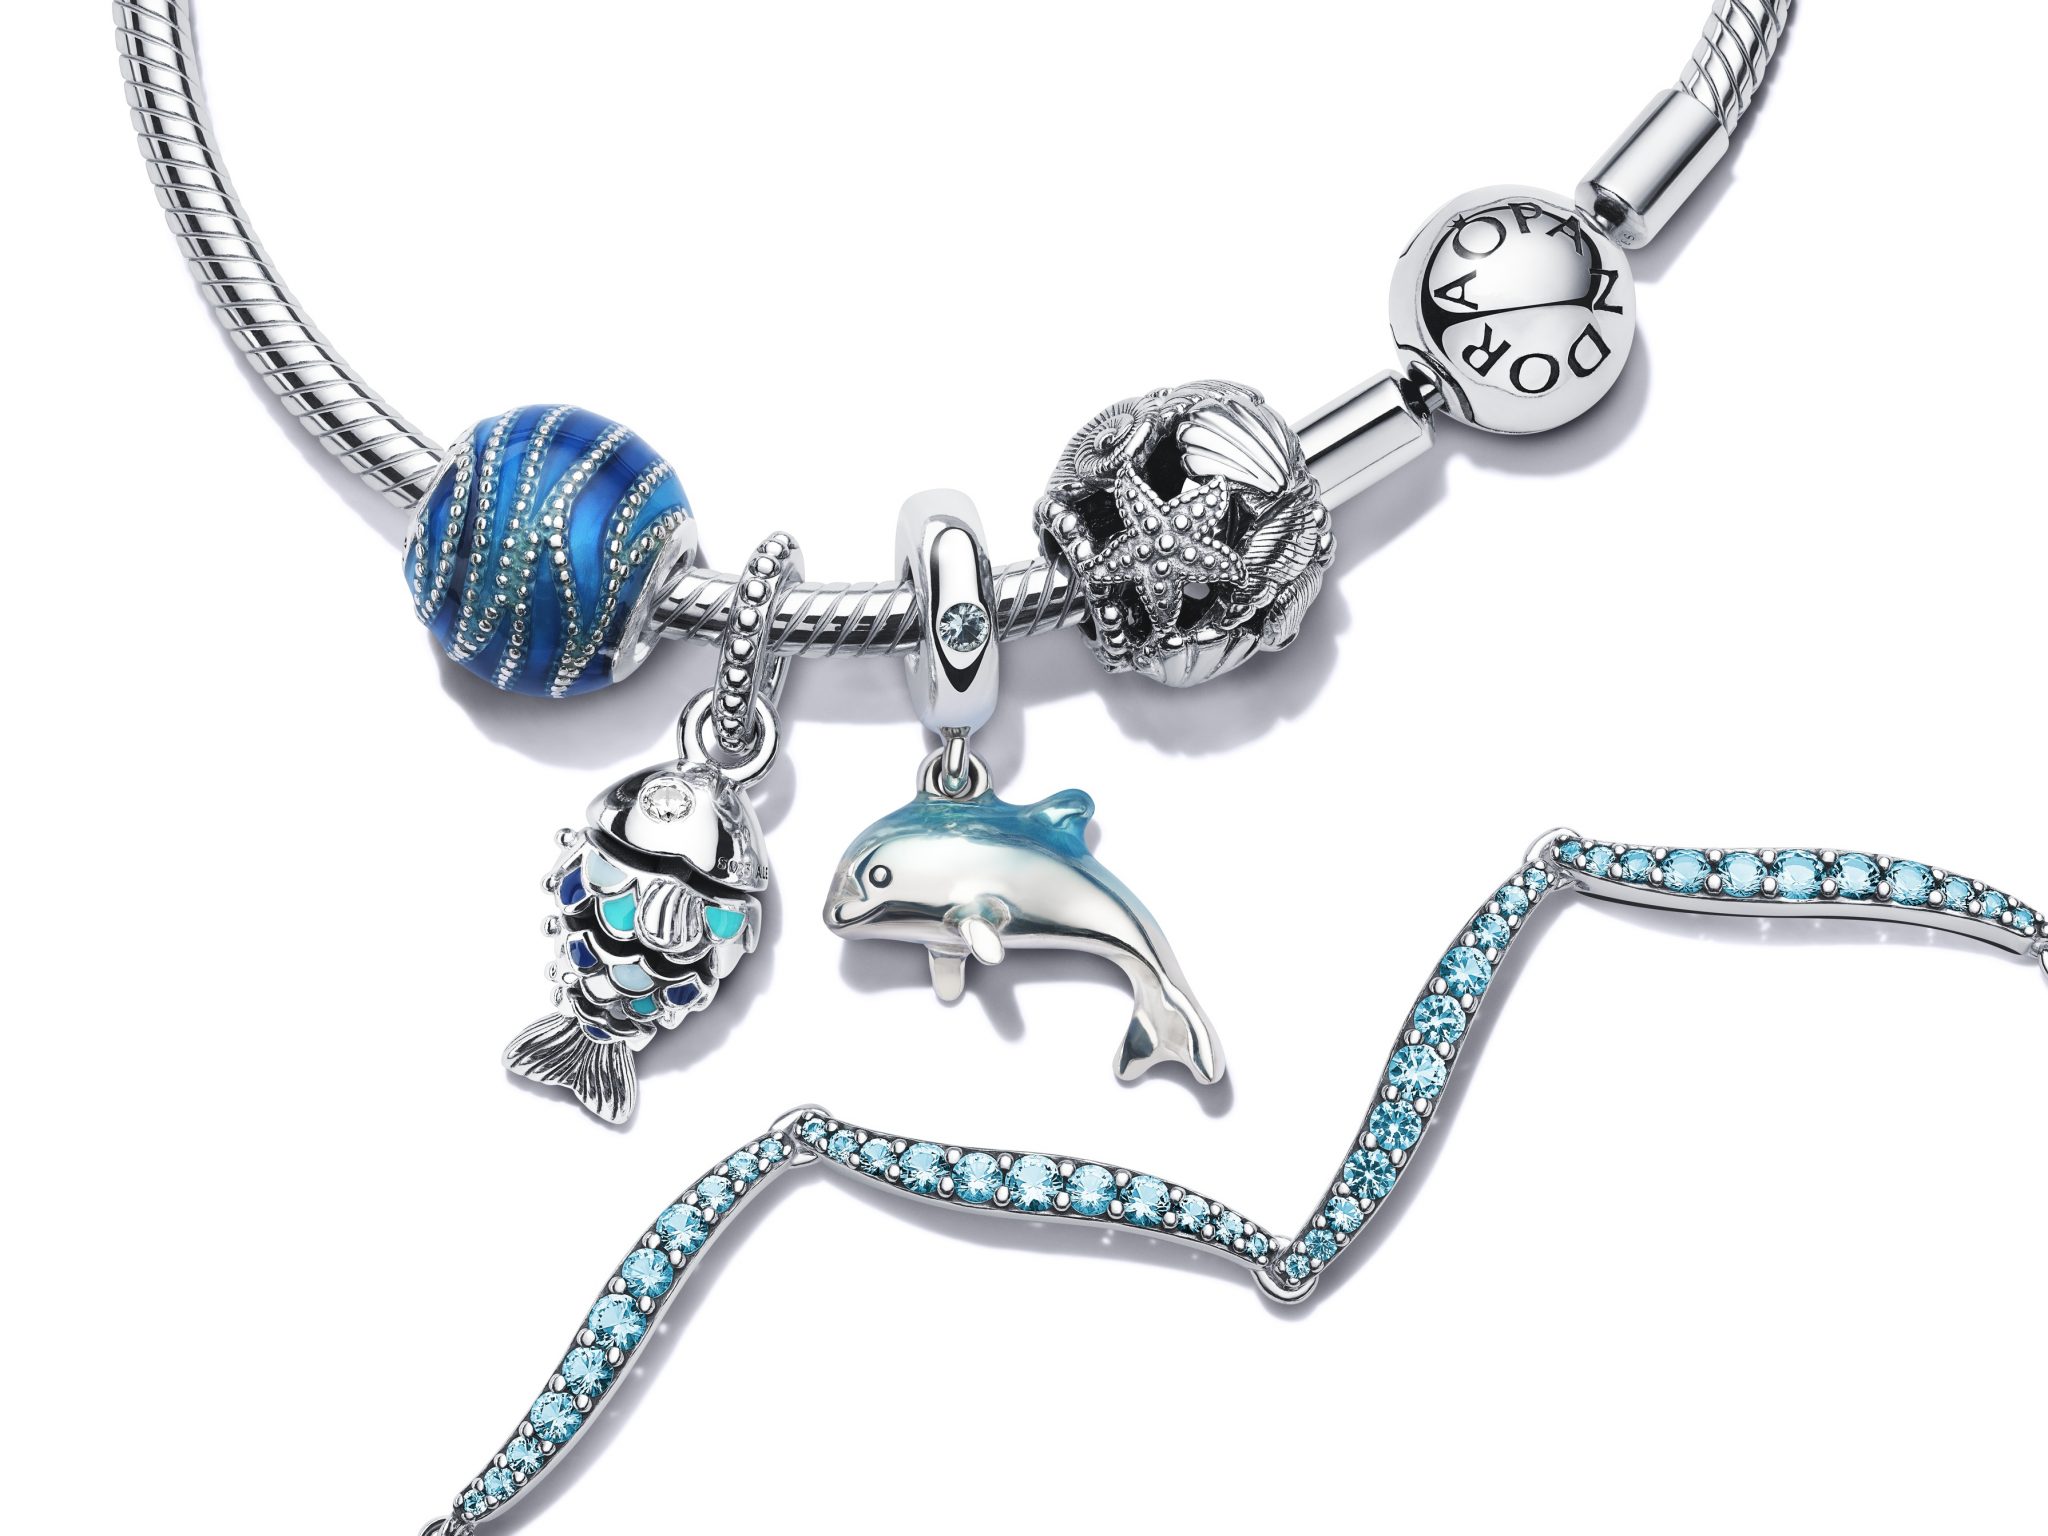 Ride the waves with Pandora’s Blue Ocean collection - Hashtag Legend